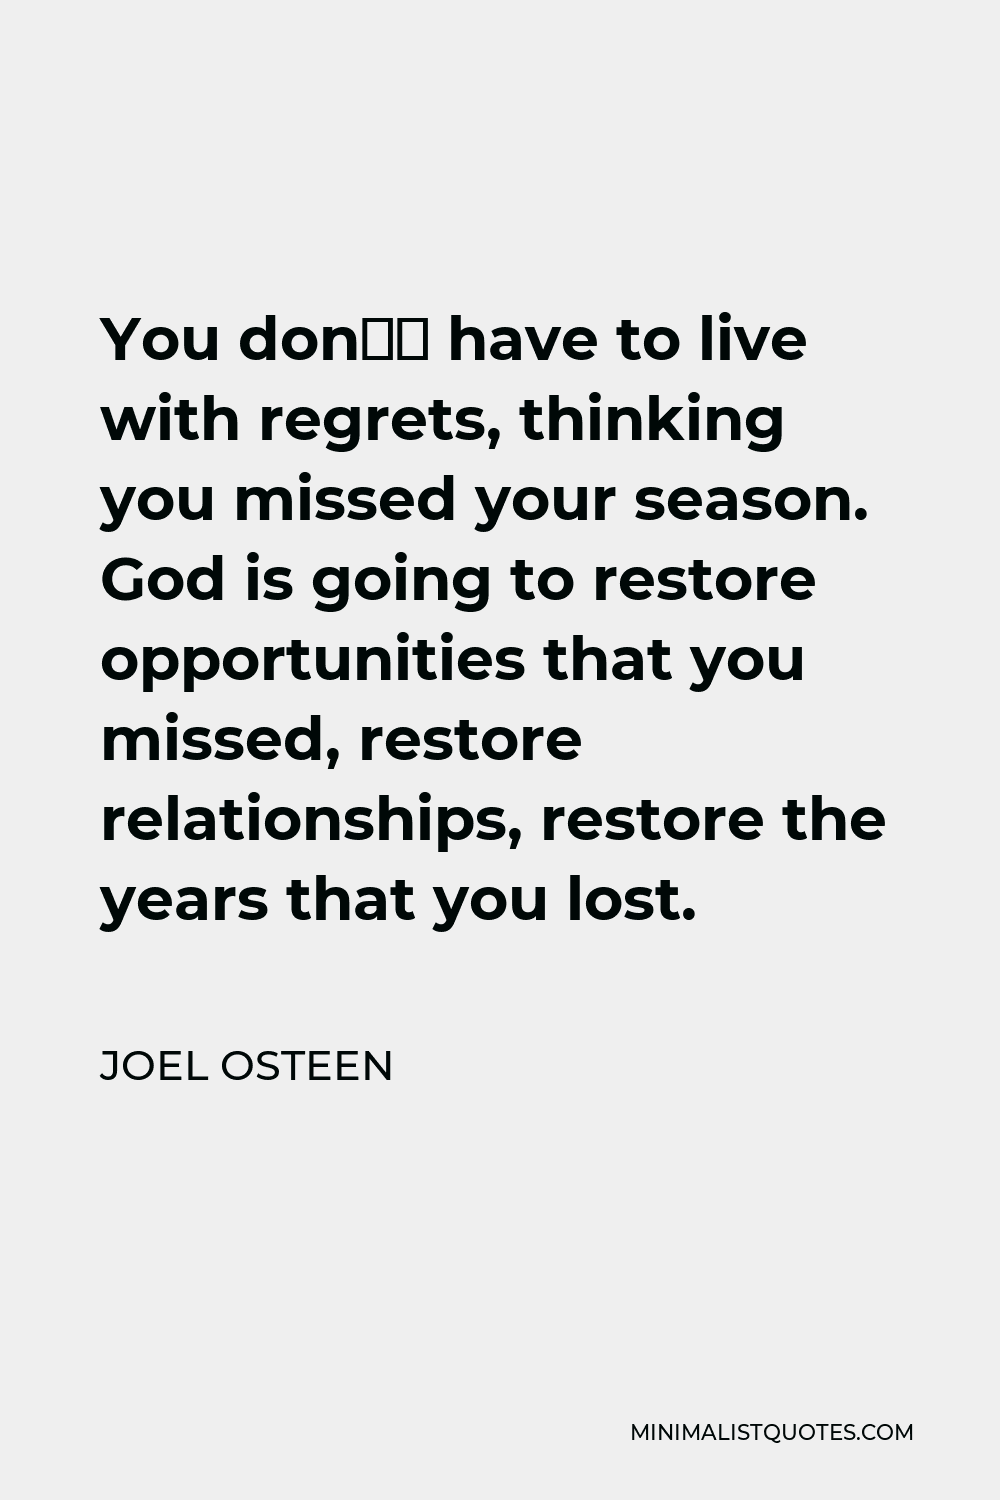 Joel Osteen Quote - You don’t have to live with regrets, thinking you missed your season. God is going to restore opportunities that you missed, restore relationships, restore the years that you lost.